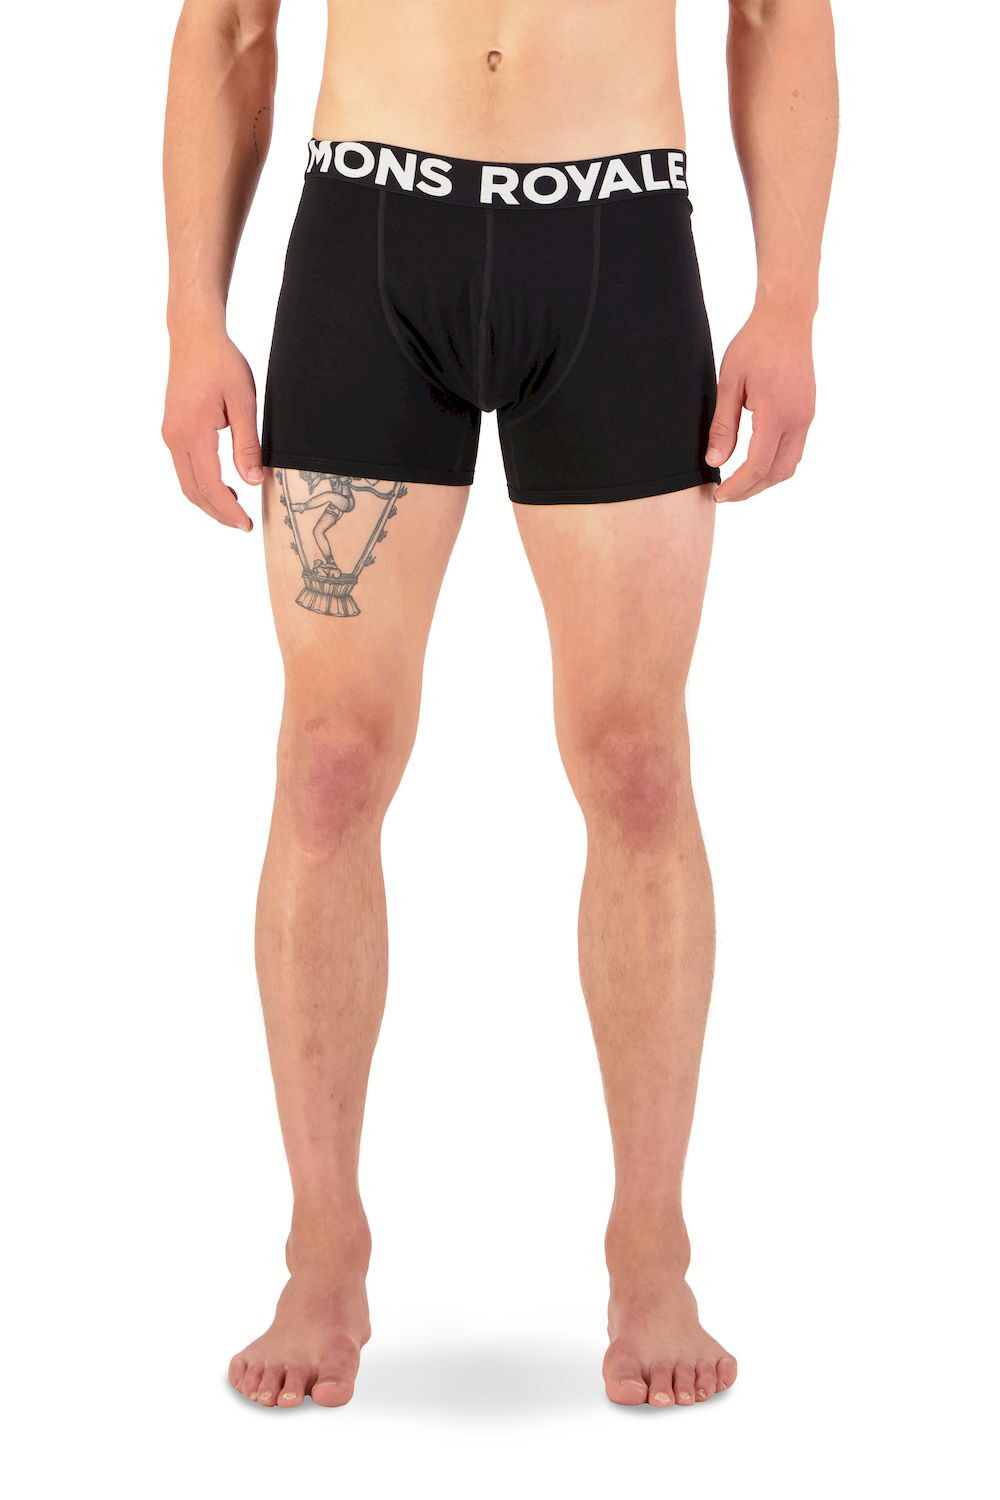 Mons Royale Hold 'em Shorty Boxer - Ropa interior - Hombre